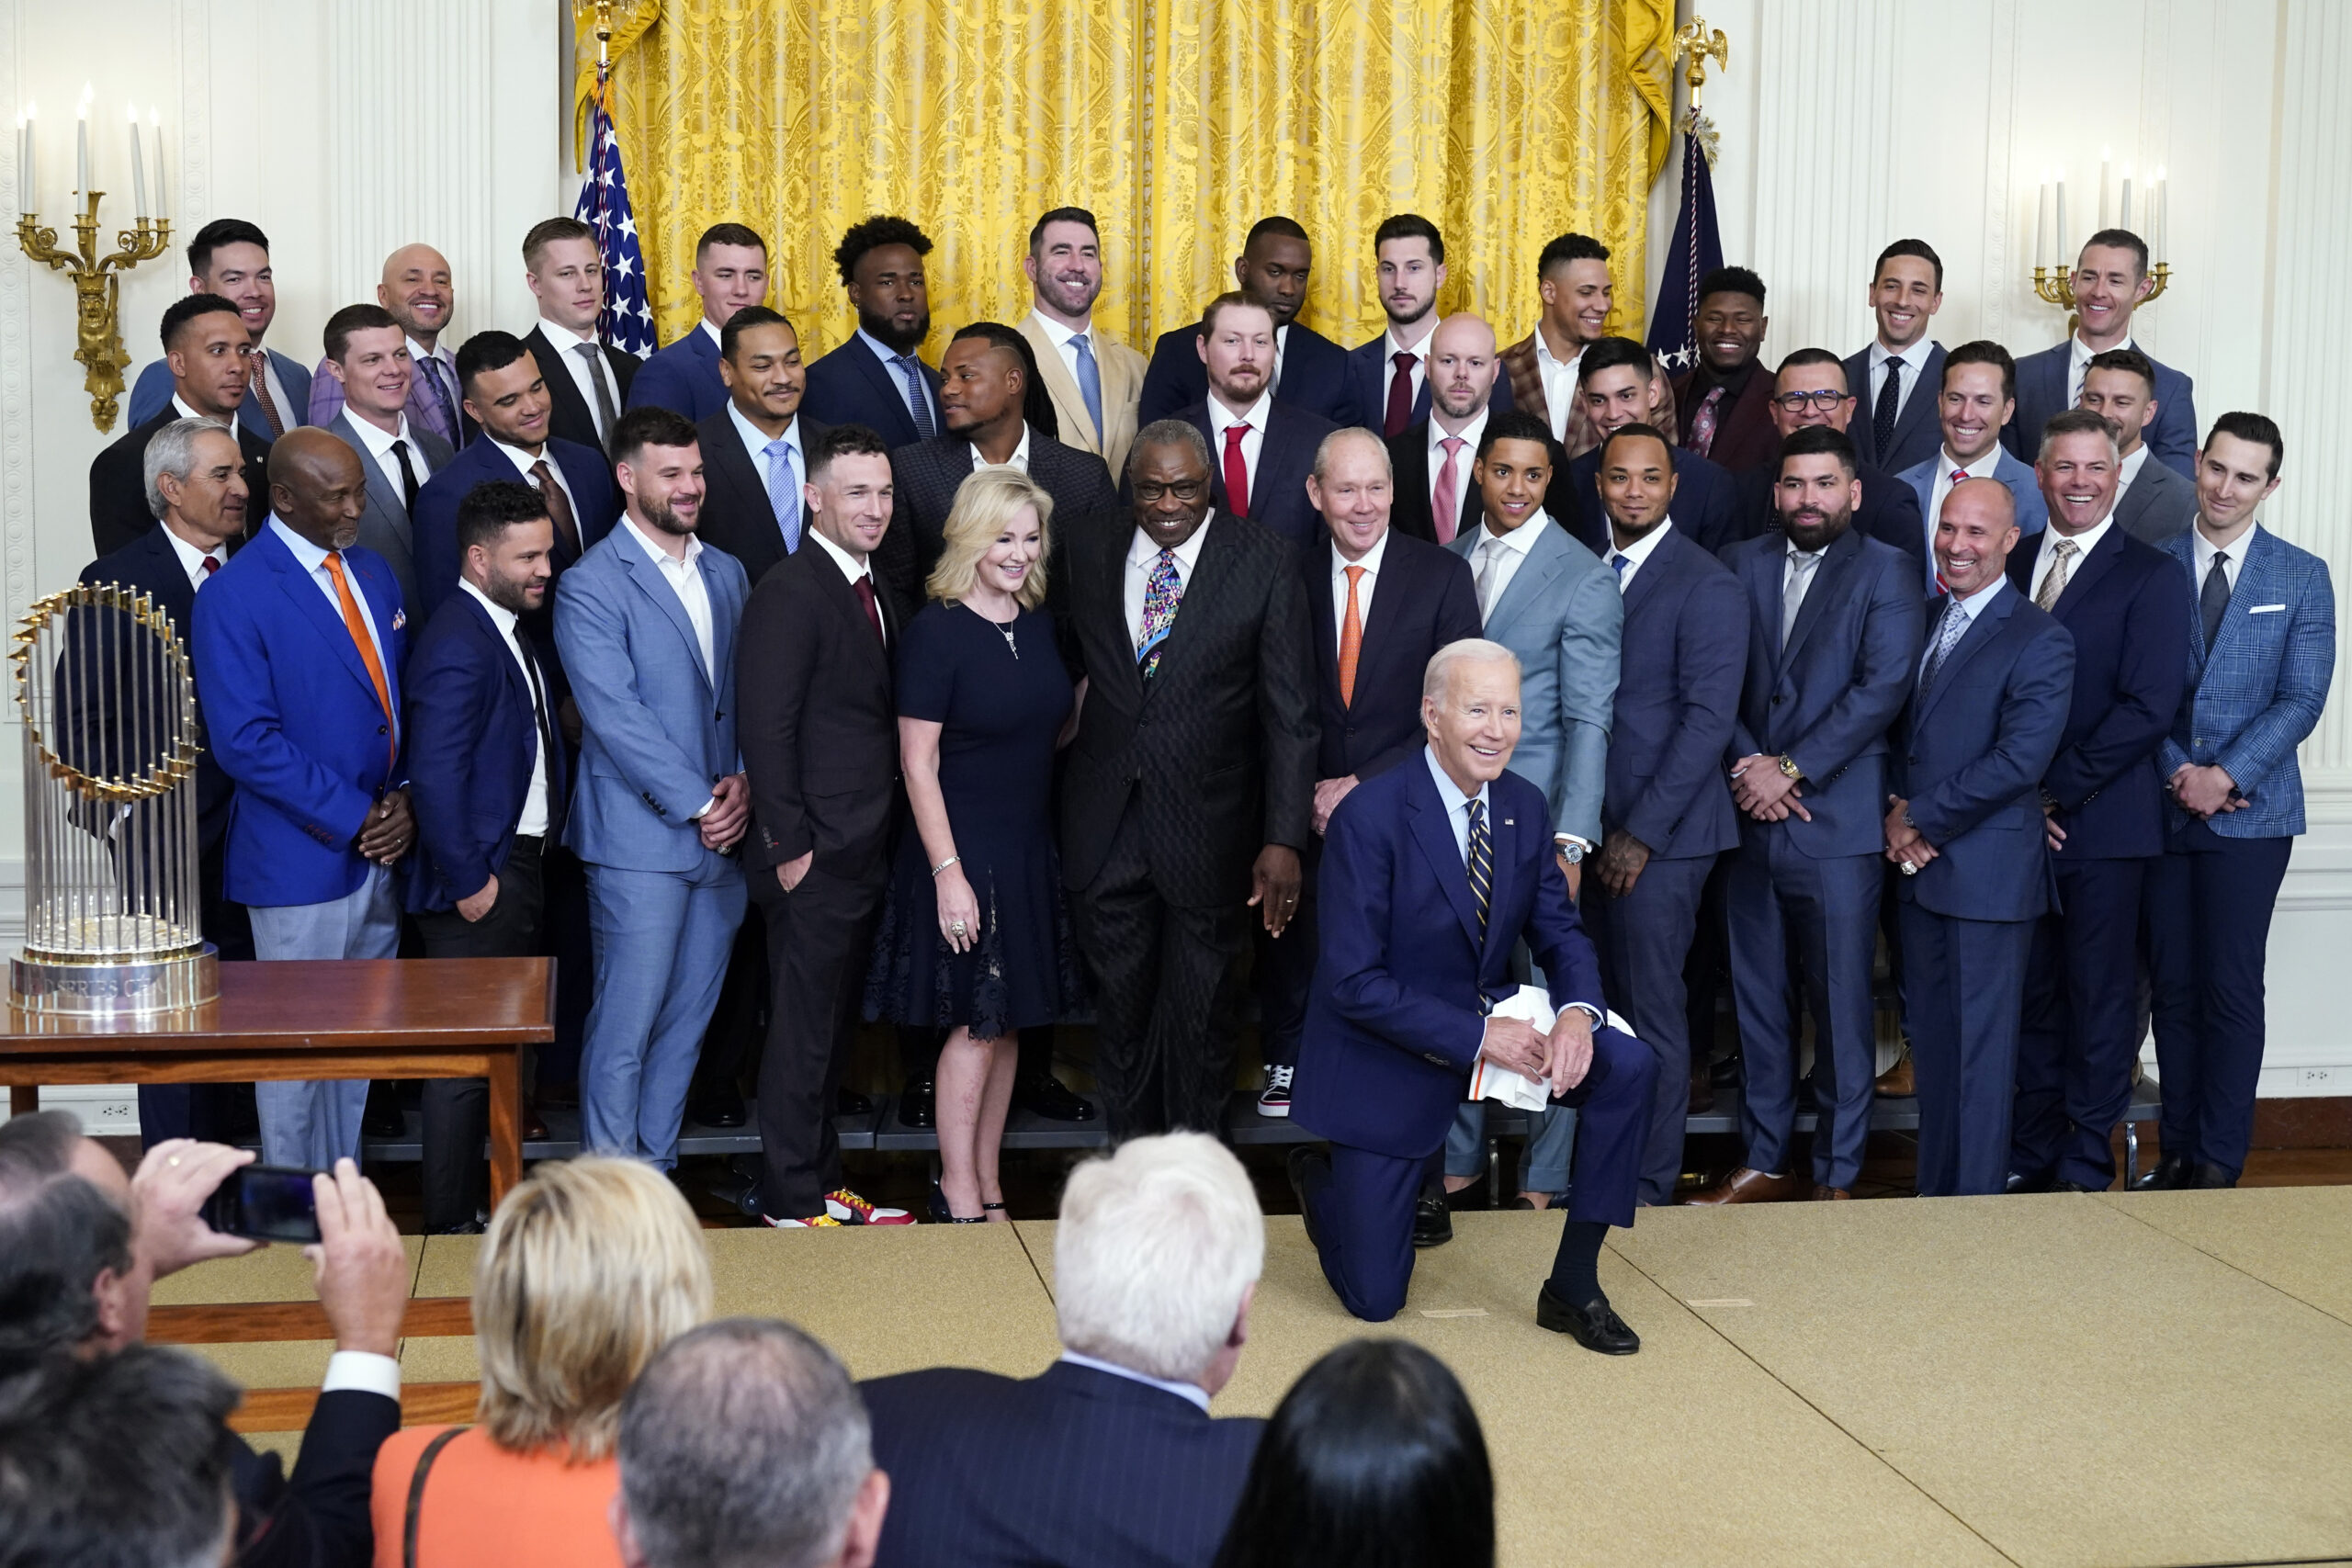 President Joe Biden poses for a photo during an event celebrating the 2022 World Series champion Ho...